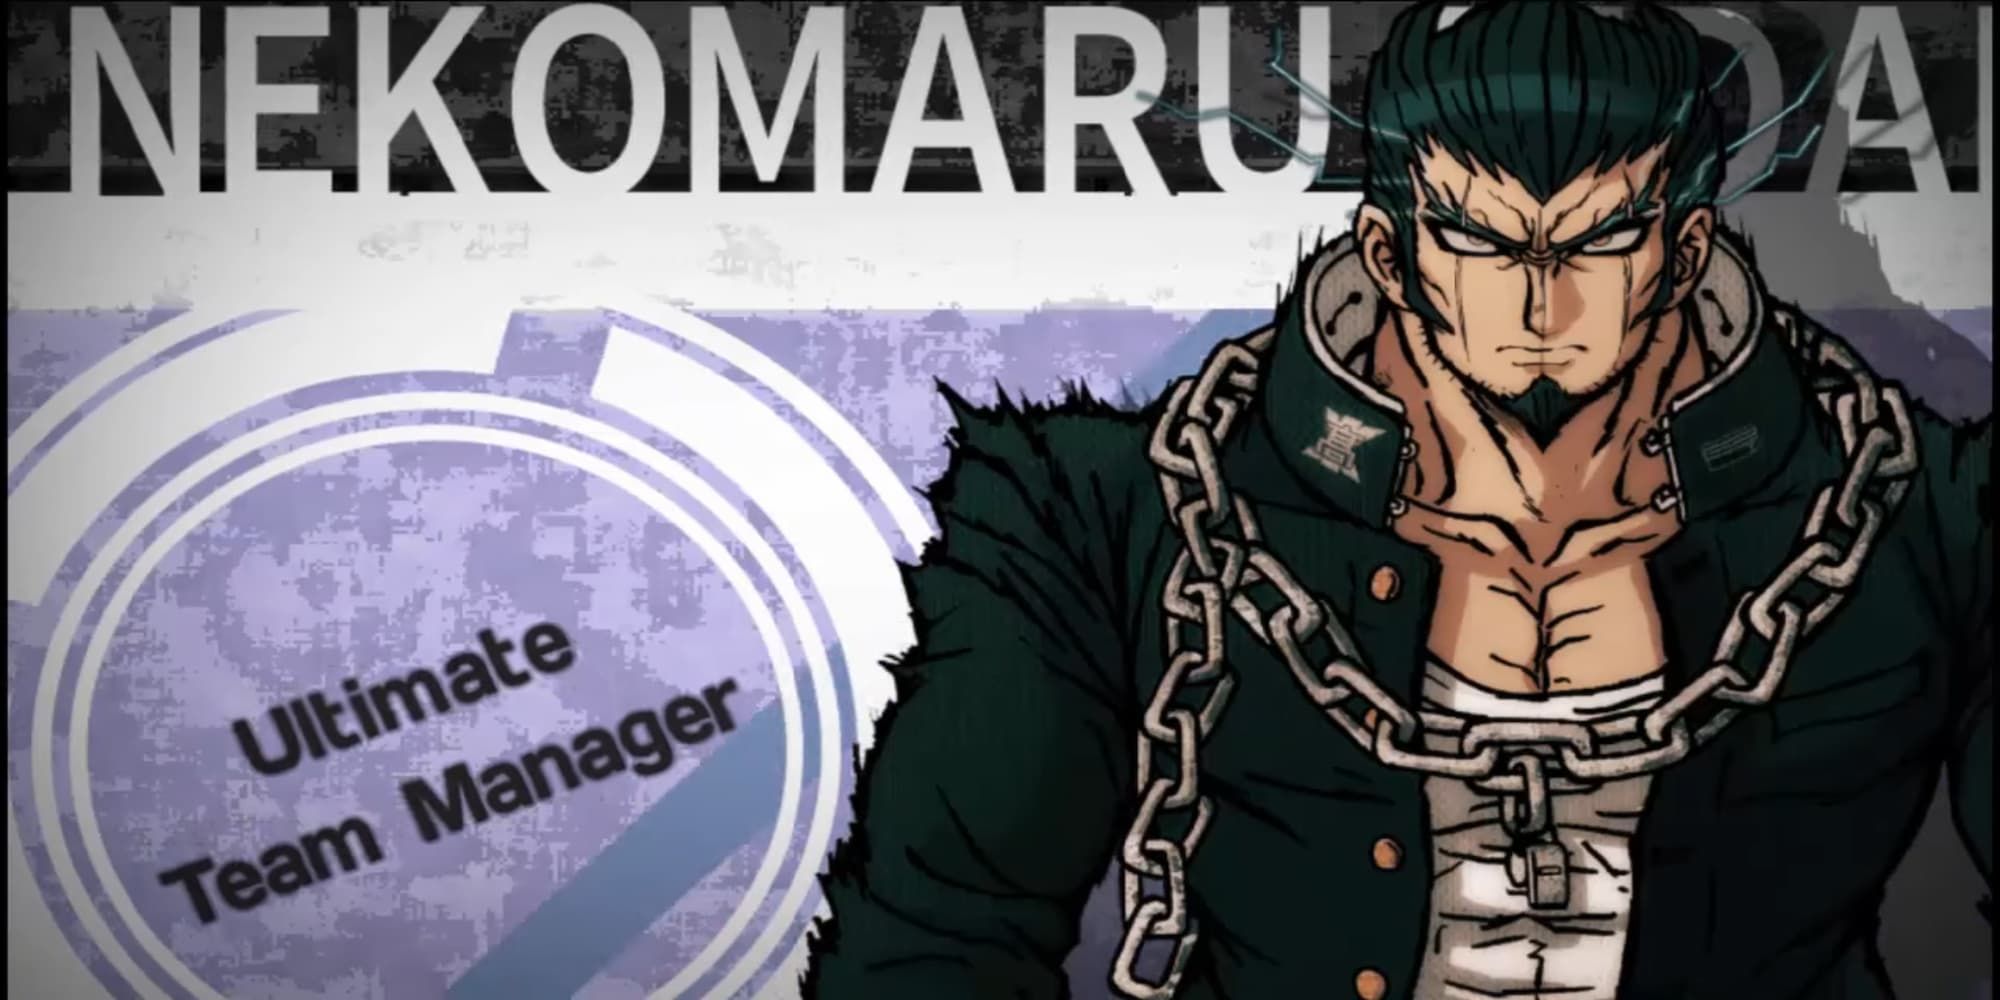 Nekomaru from Danganronpa 2 wearing white button down and black uniform jacket with a chain around his neck staring straight at camera